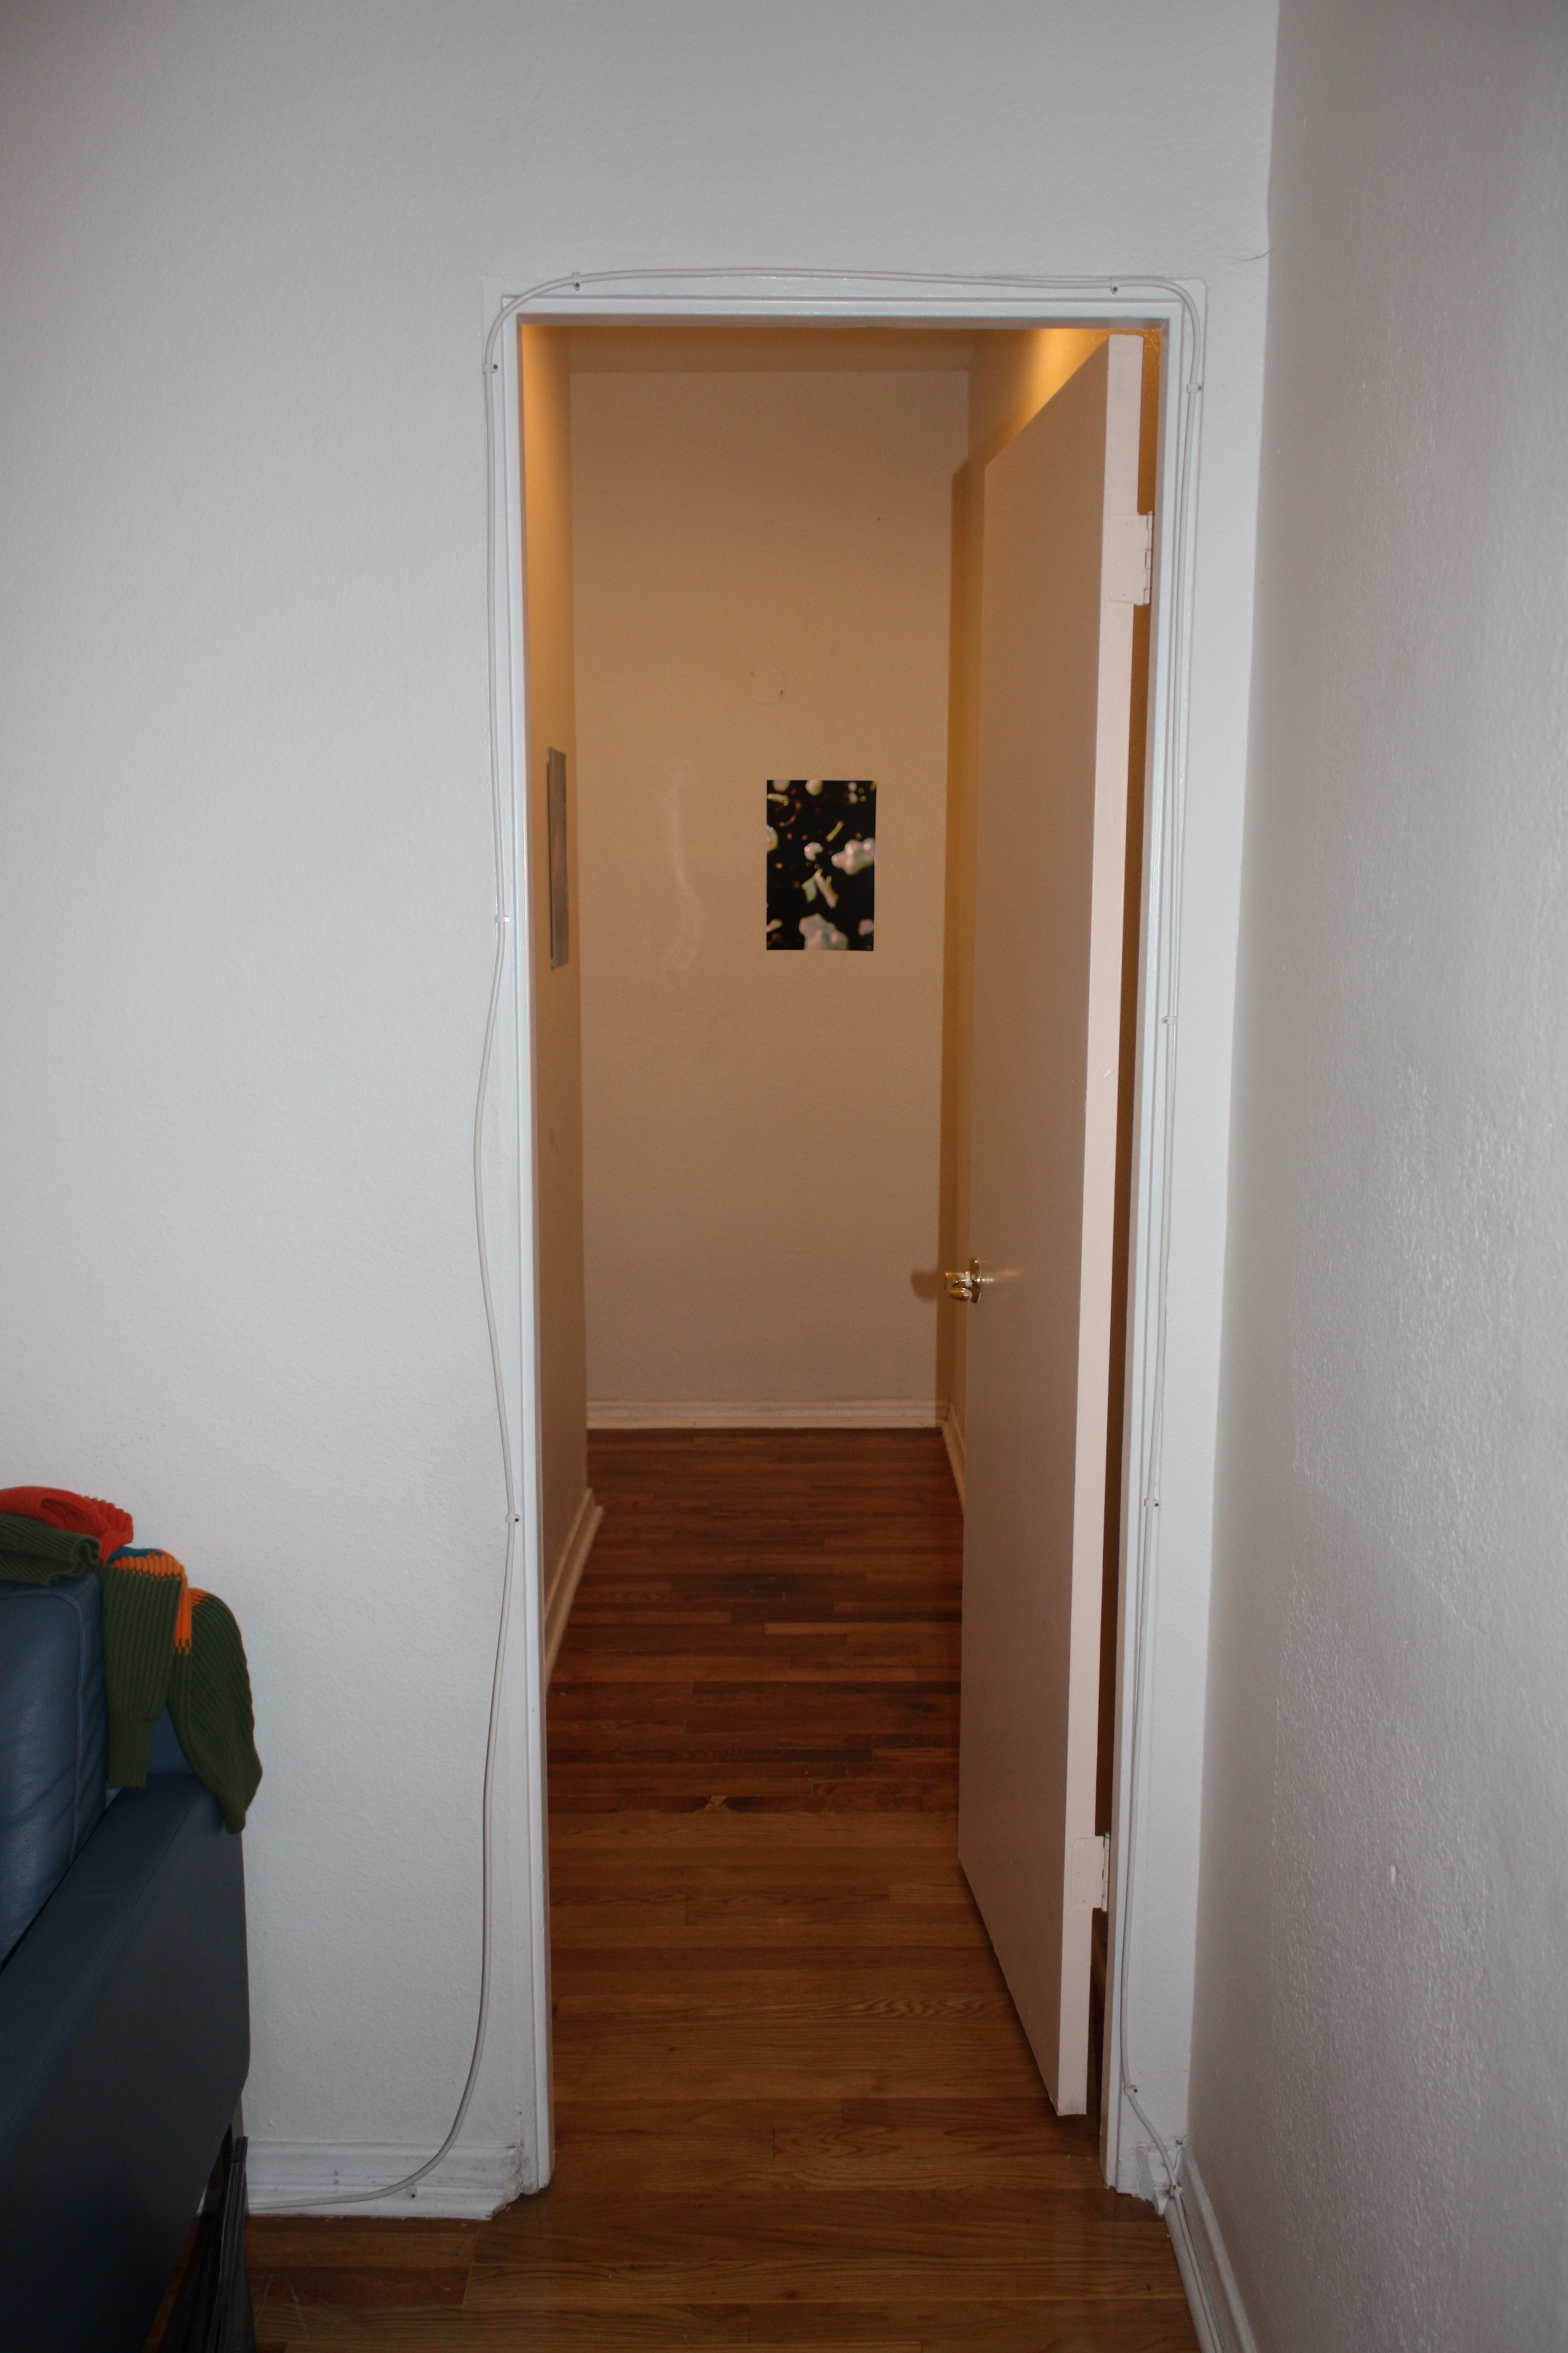 A narrow hallway with a small print hung on the wall